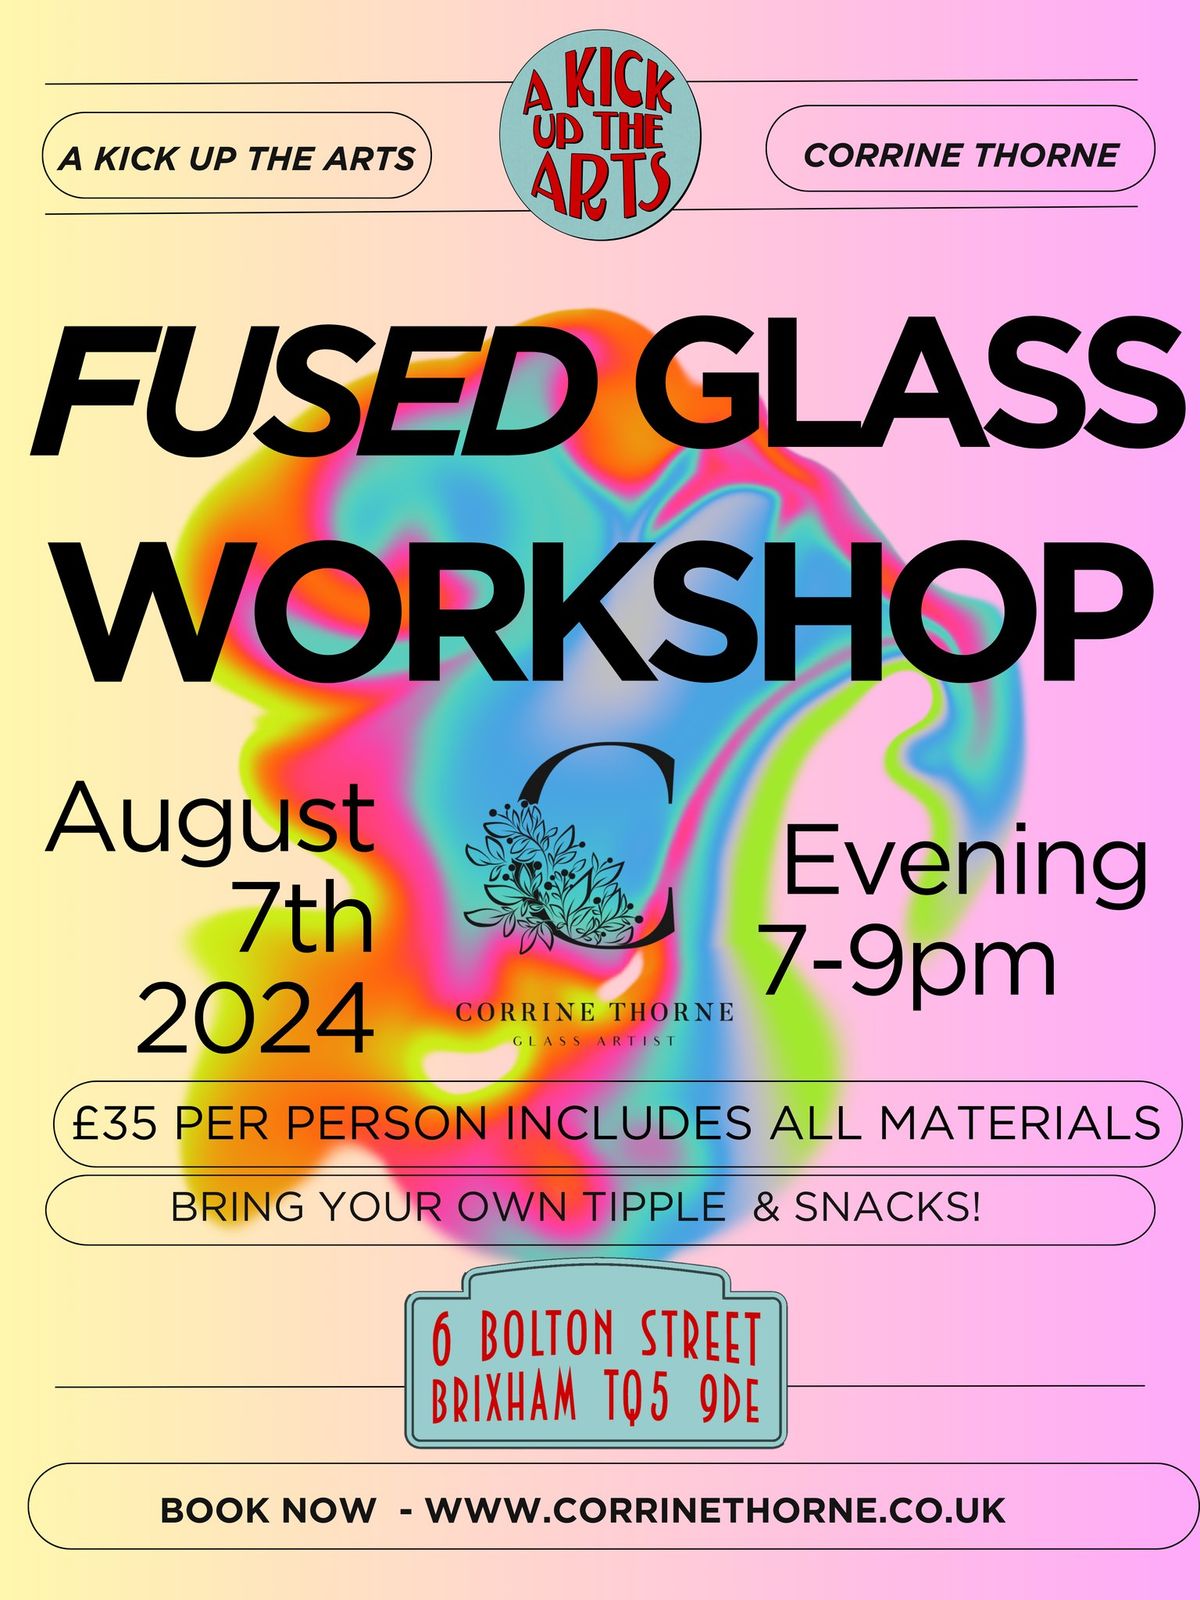 Evening Fused Glass Workshop with Corrine Thorne - Glass Artist